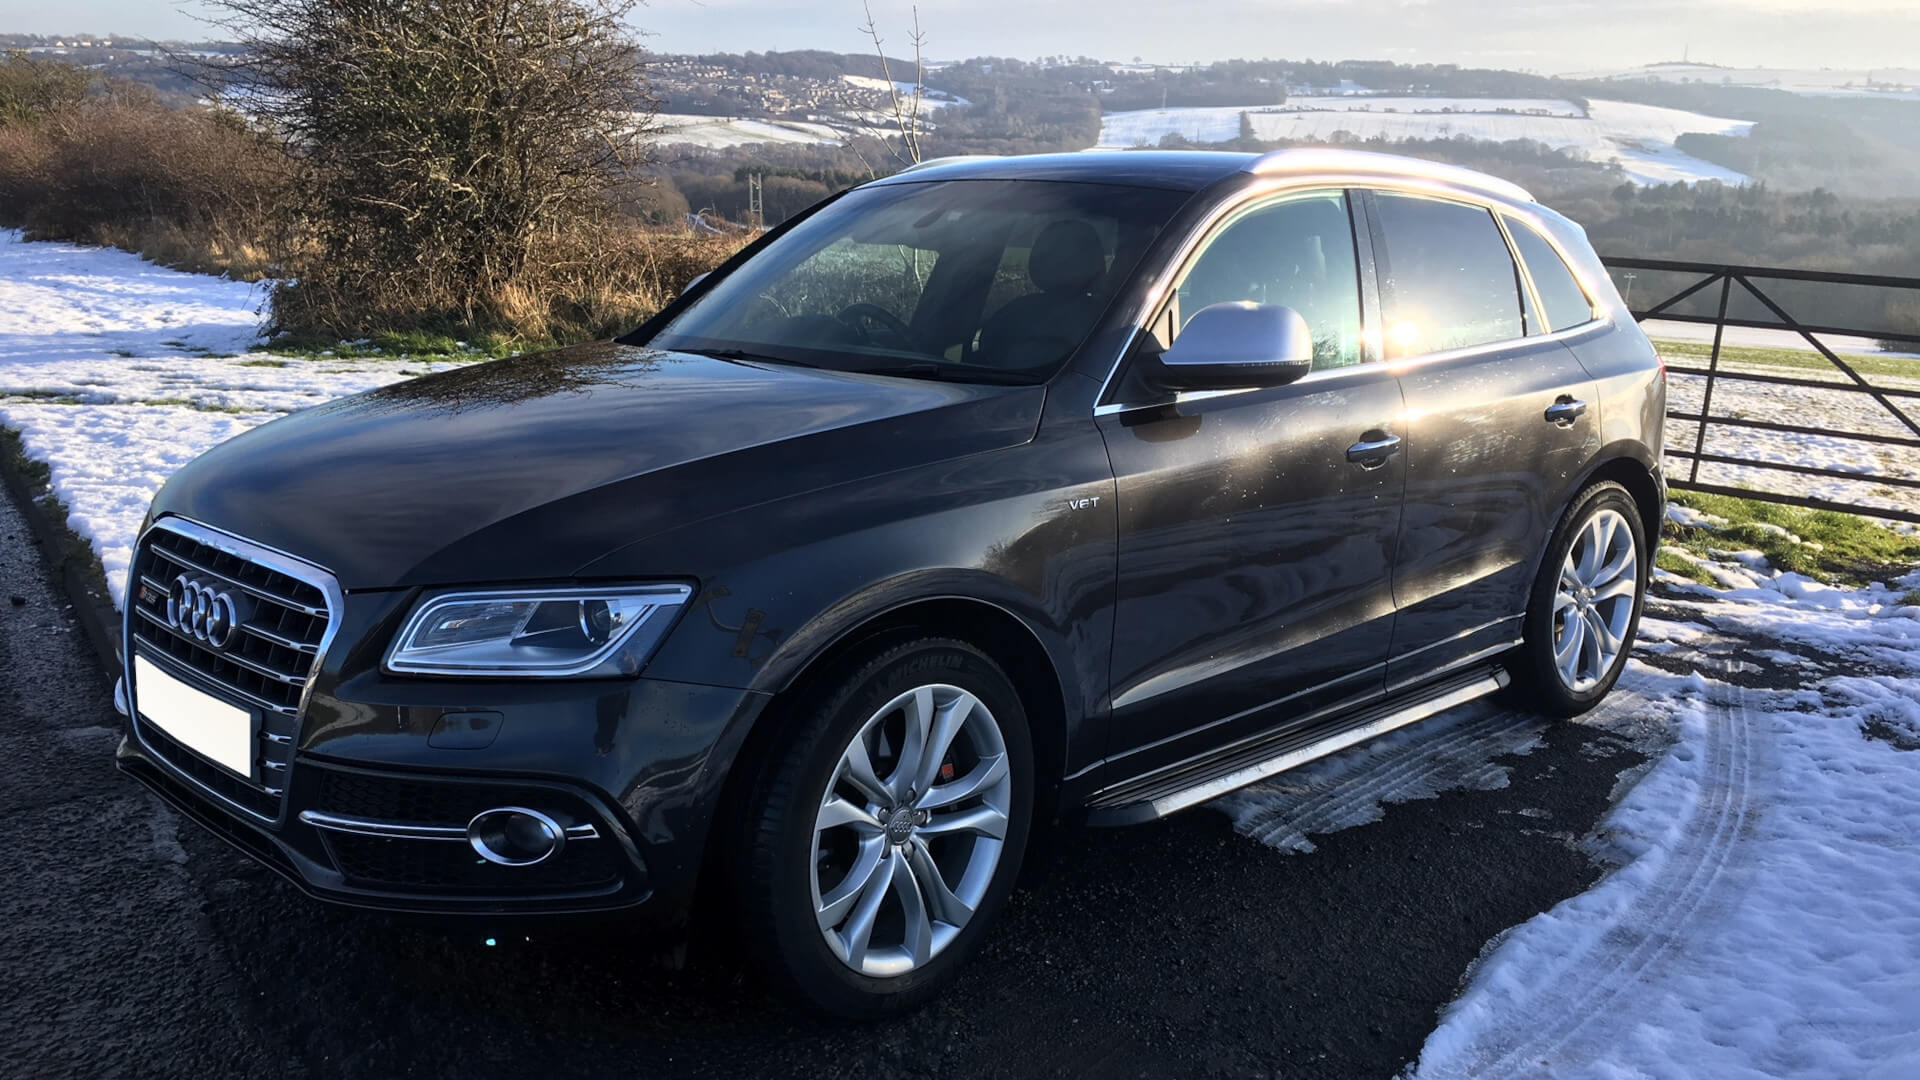 Direct4x4 Accessories for Audi Vehicles